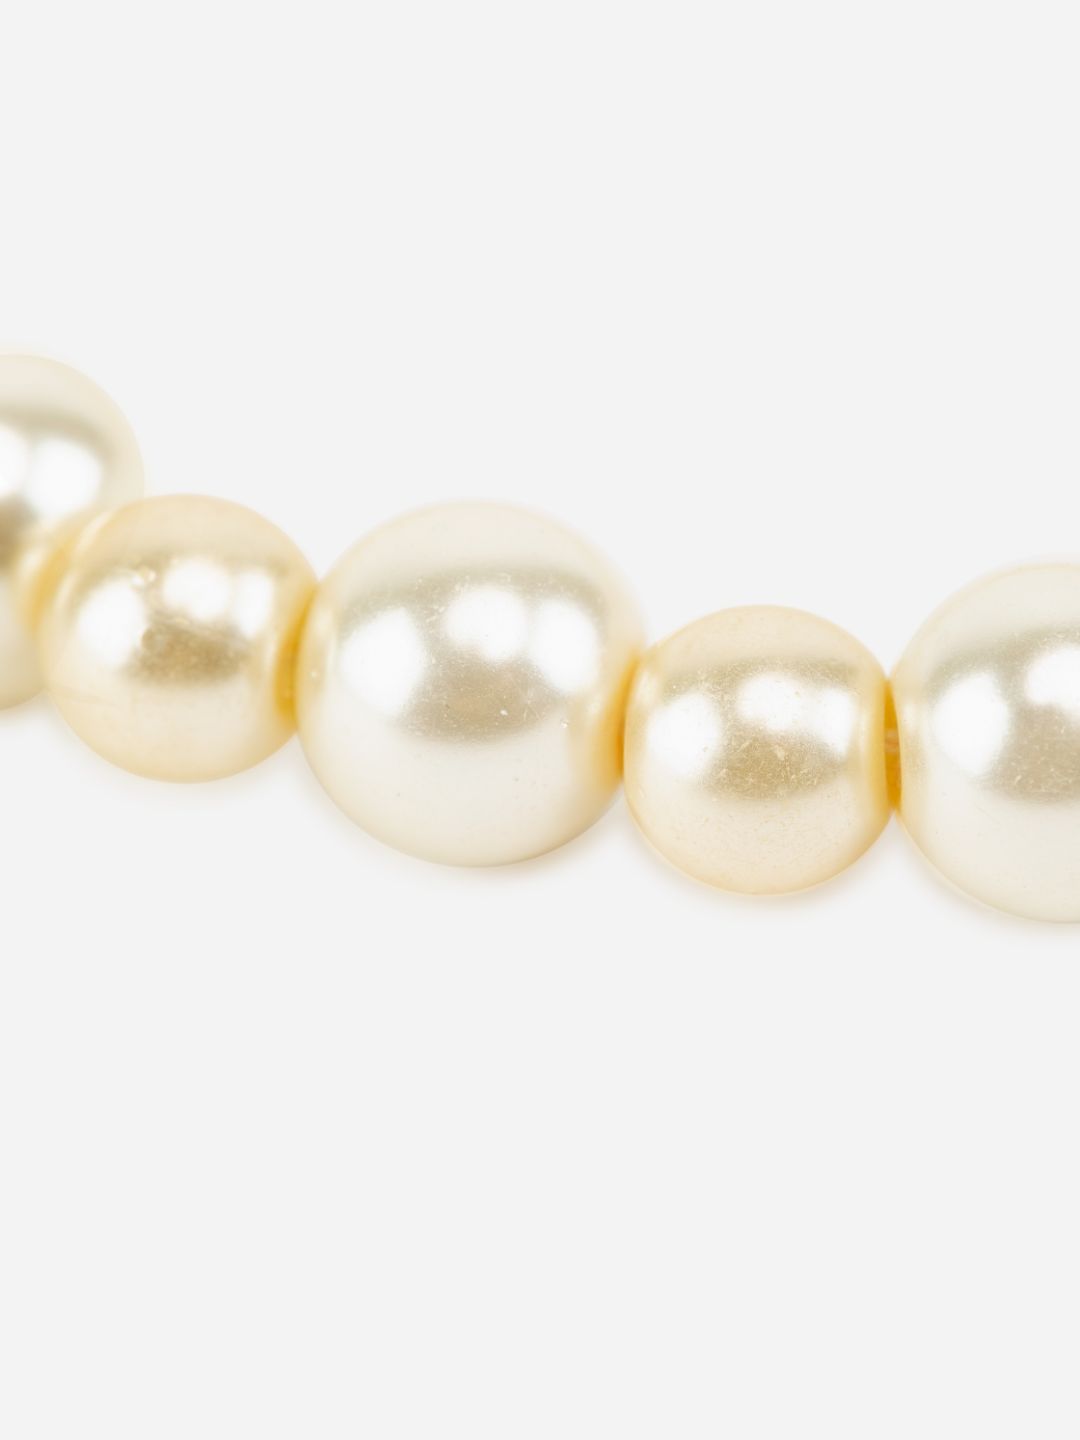 White Pearl Link Gold-Plated Bracelet